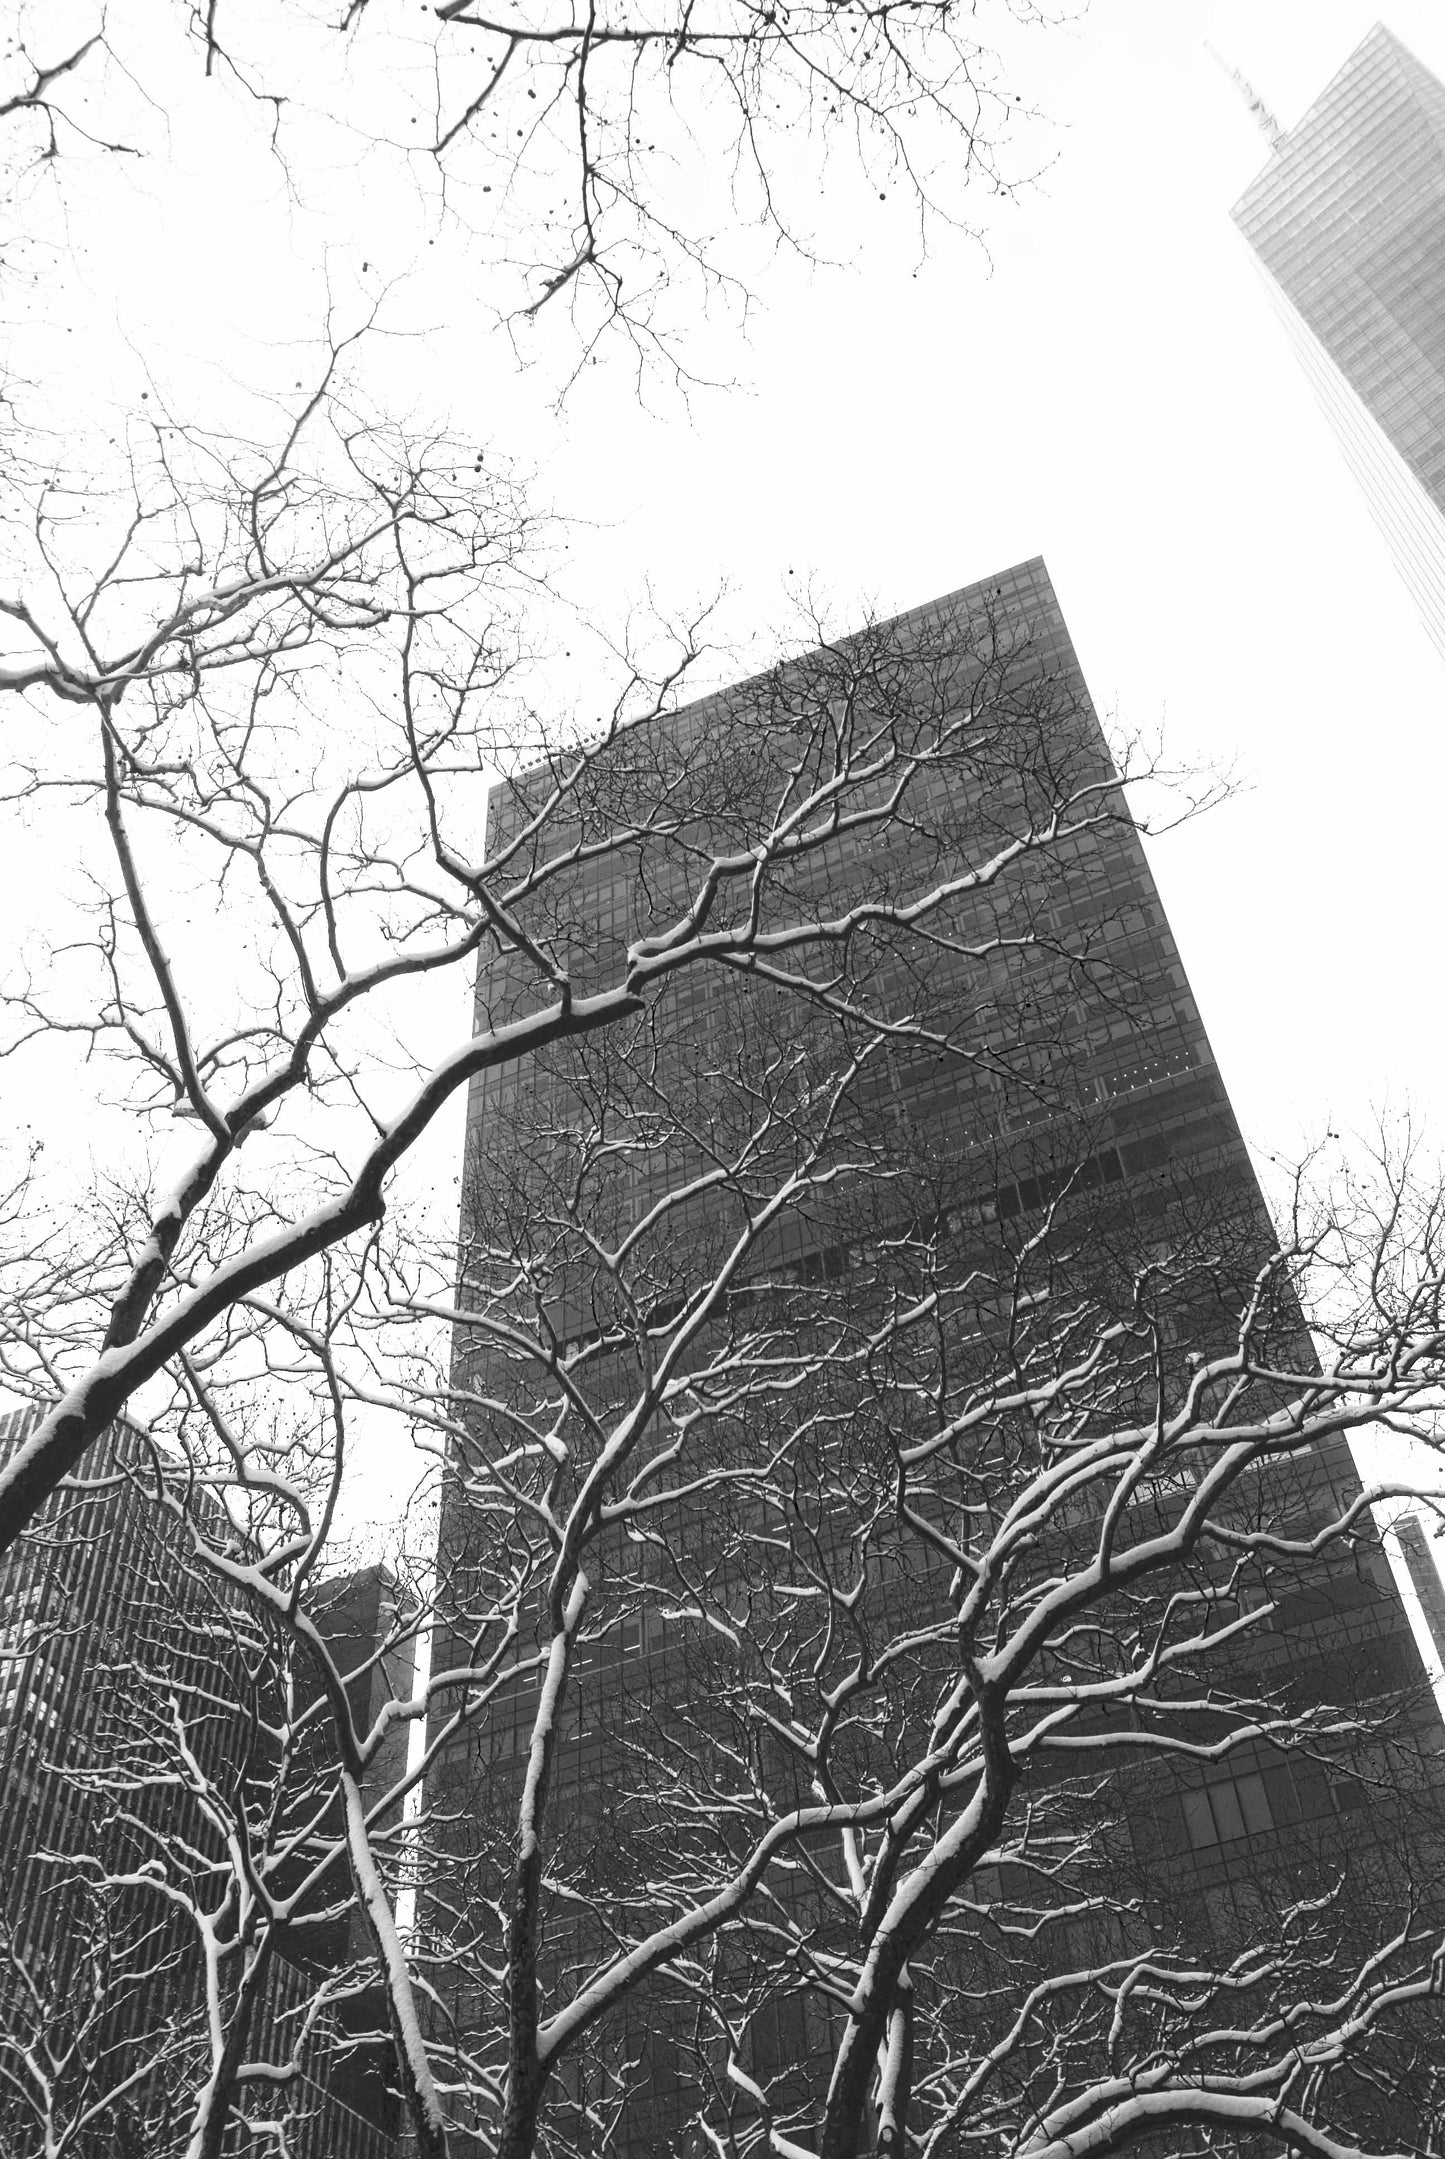 Alessandra Mattanza | ENCOUNTER OF BLACK AND WHITE, Bryant Park, New York. The imposing tower at Thre Bryant Park contrasts with bare, snow-covered branches in the park. Available as an art print or as a photographic print on acrylic glass.